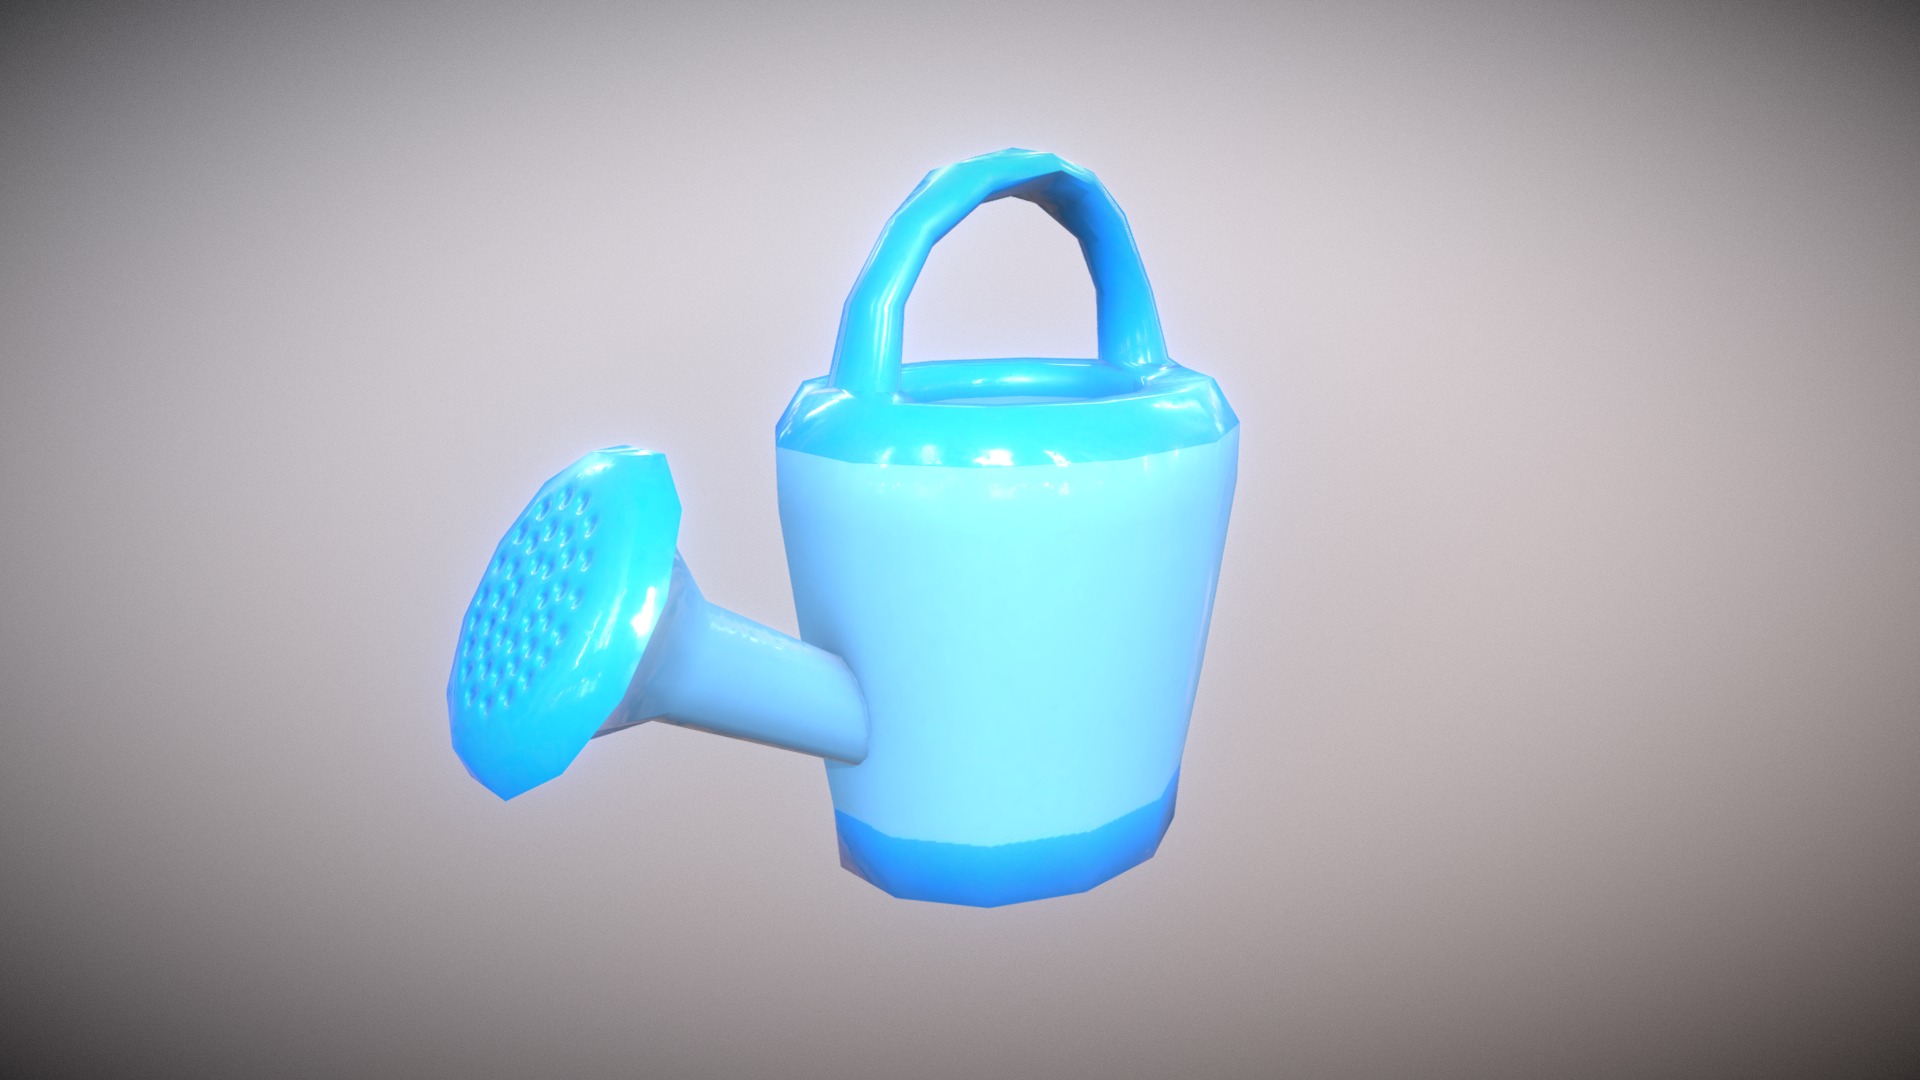 3D model Watering Jar Toy low-poly game ready - This is a 3D model of the Watering Jar Toy low-poly game ready. The 3D model is about a blue plastic water bottle.